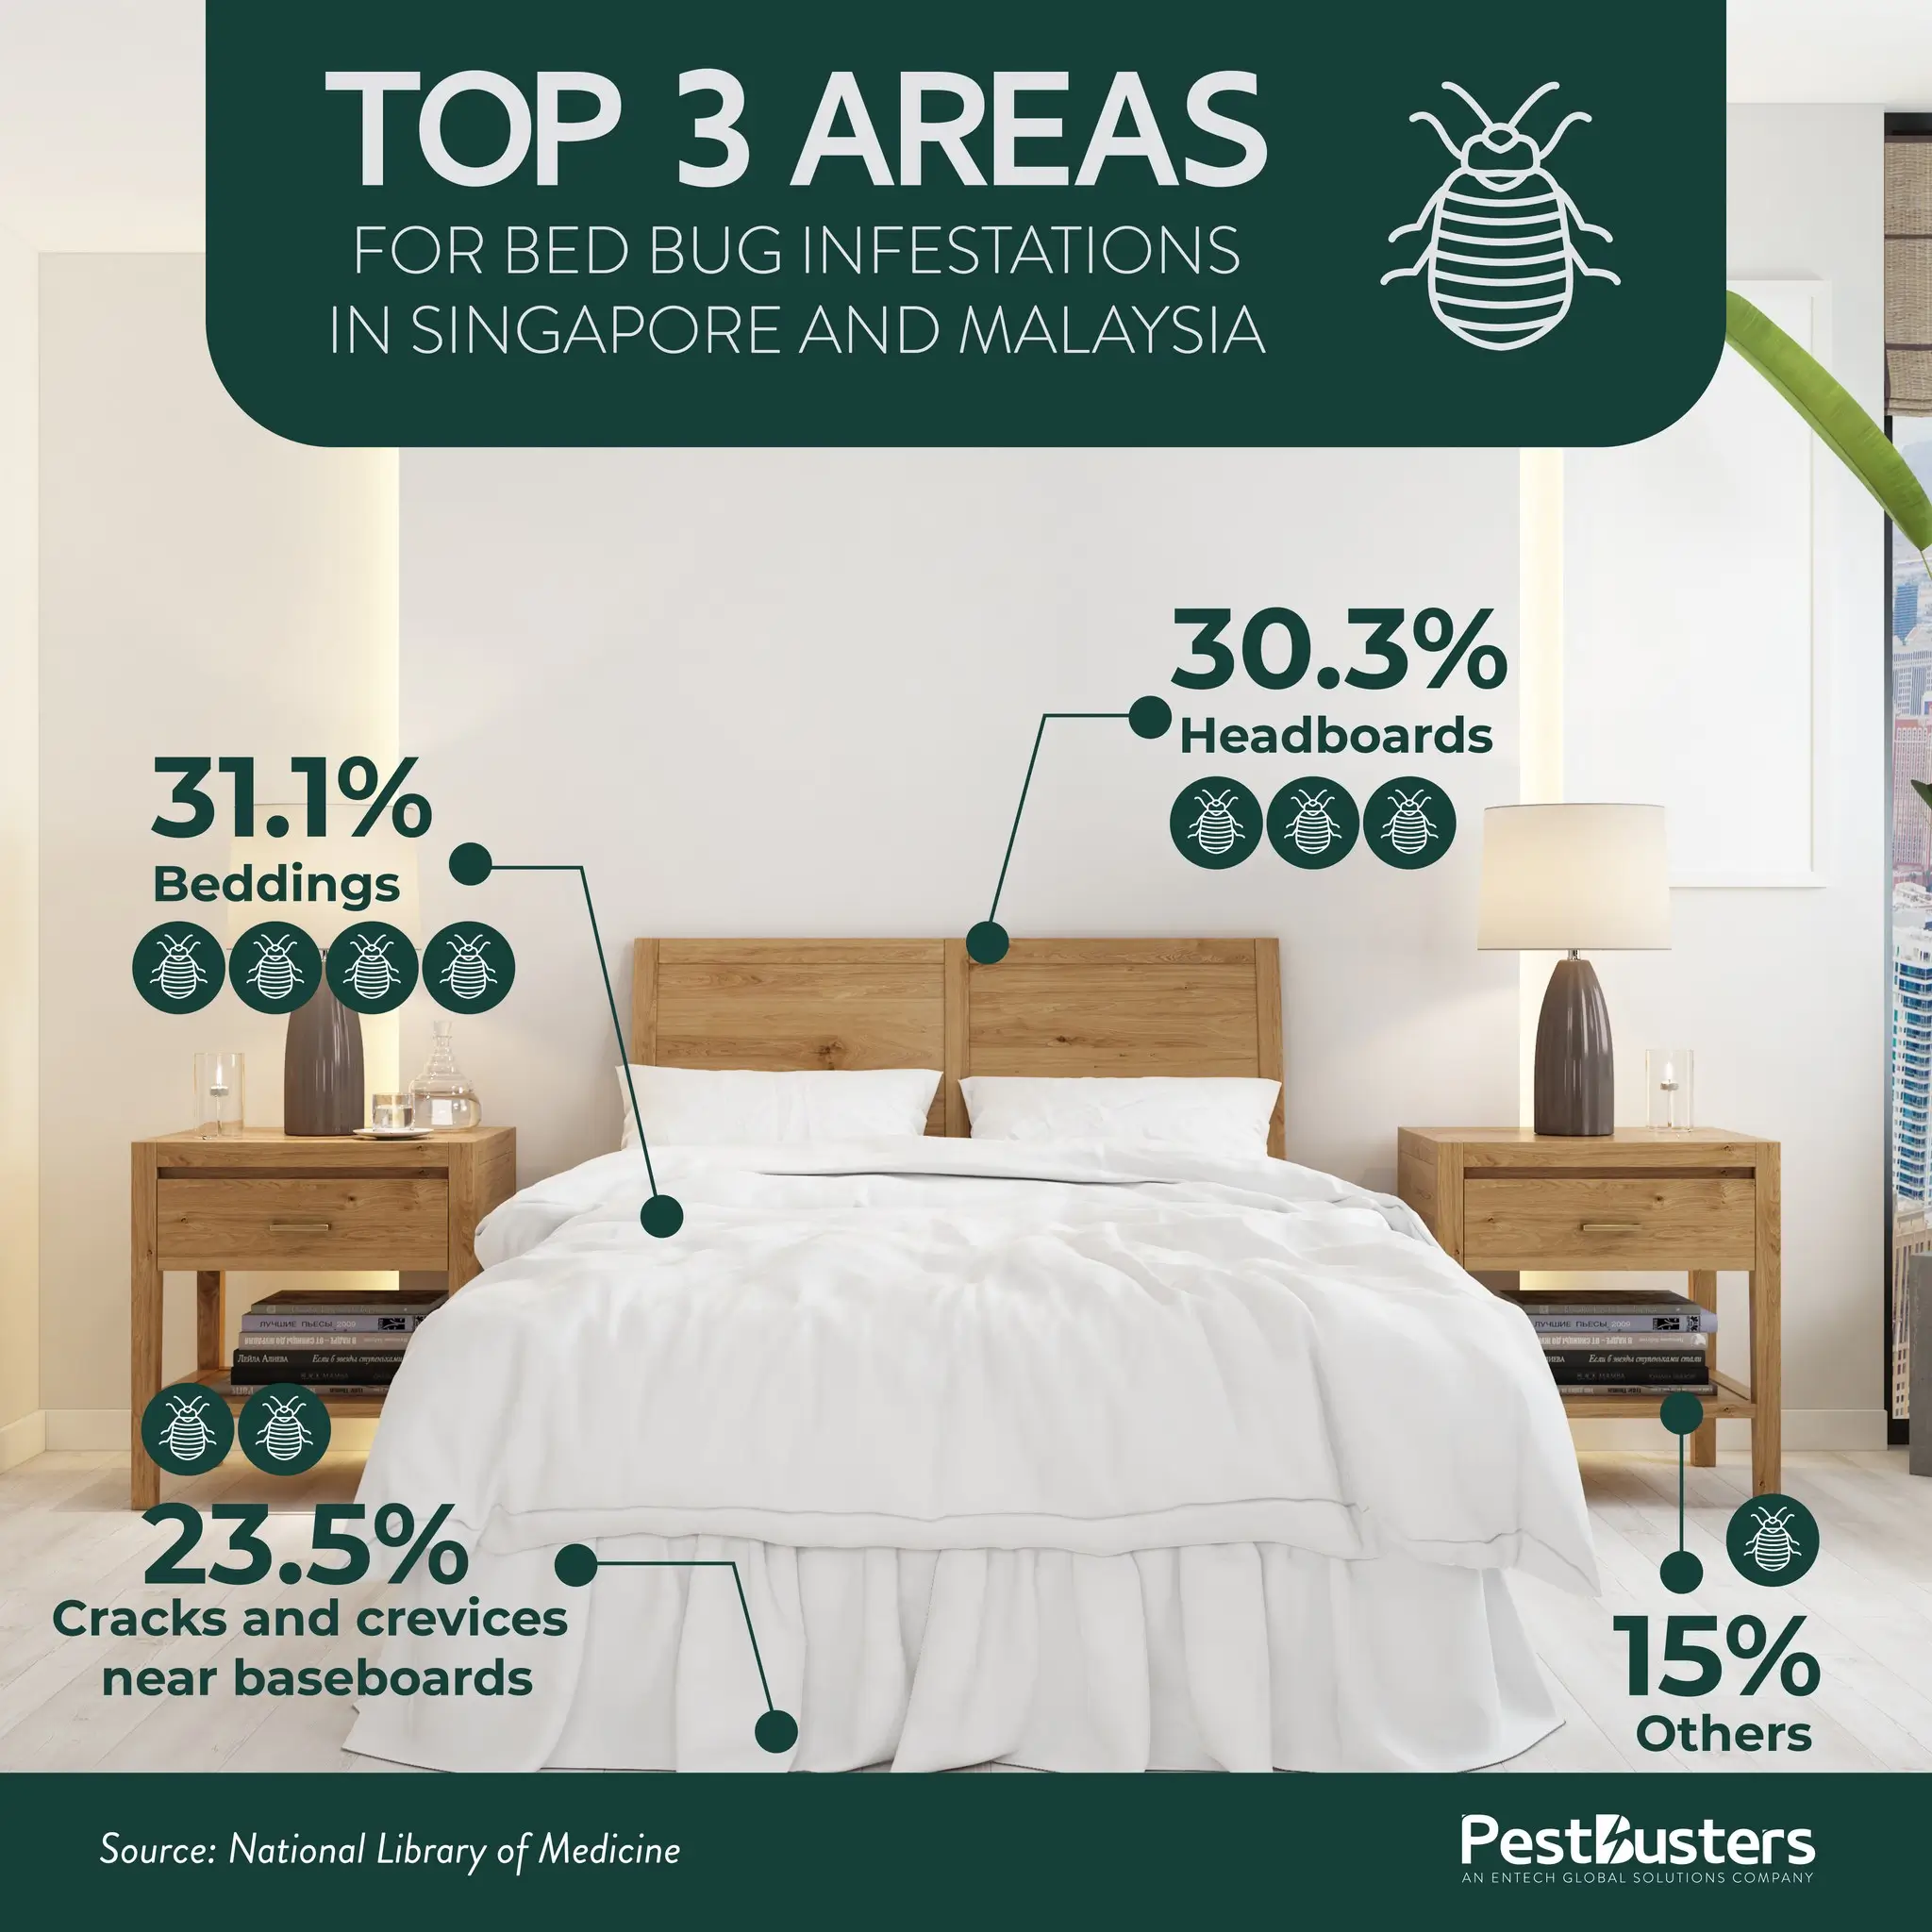 Top 3 Areas for Bed Bug Infestations